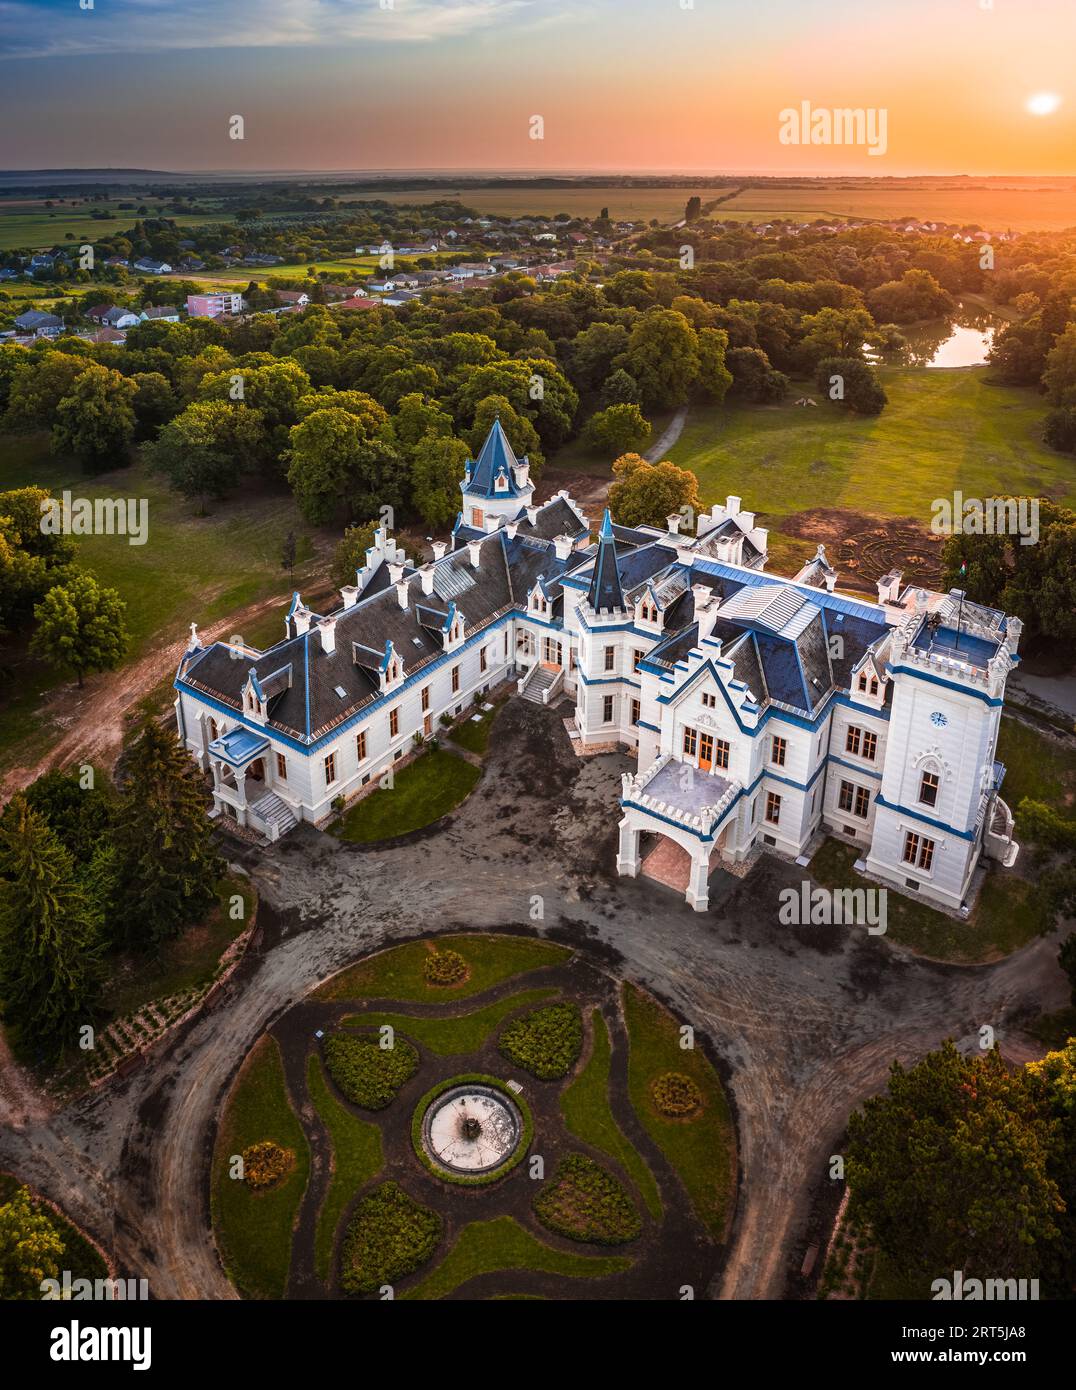 Nadasdladany, Hungary - Aerial panoramic view of the beautiful Nadasdy Mansion (Nadasdy-kastely) at the small village of Nadasdladany with rising sun, Stock Photo